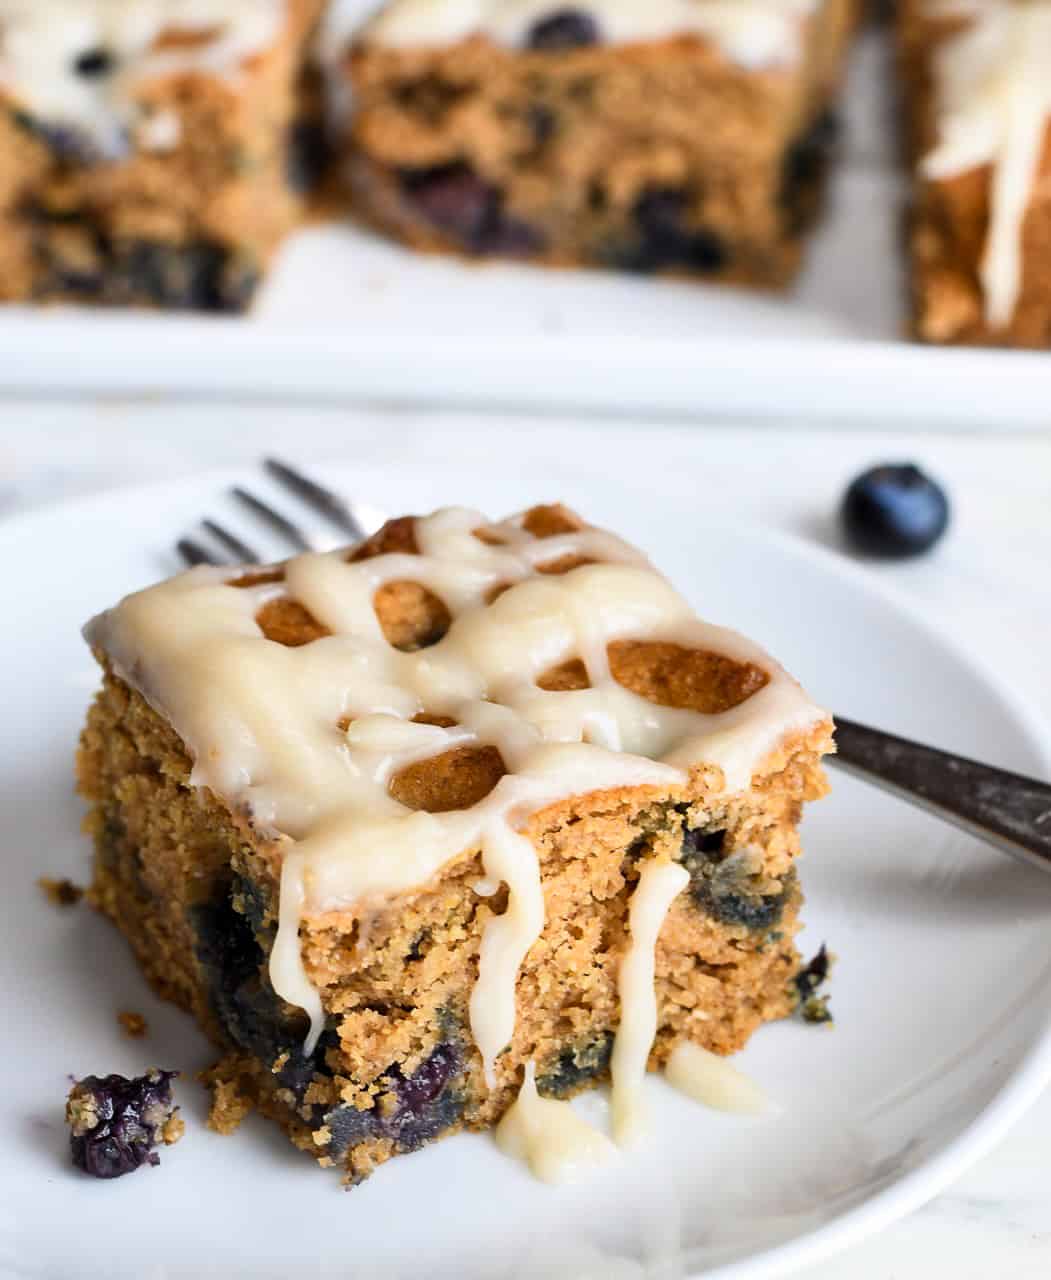 Paleo Blueberry Coffee Cake on plate with fork